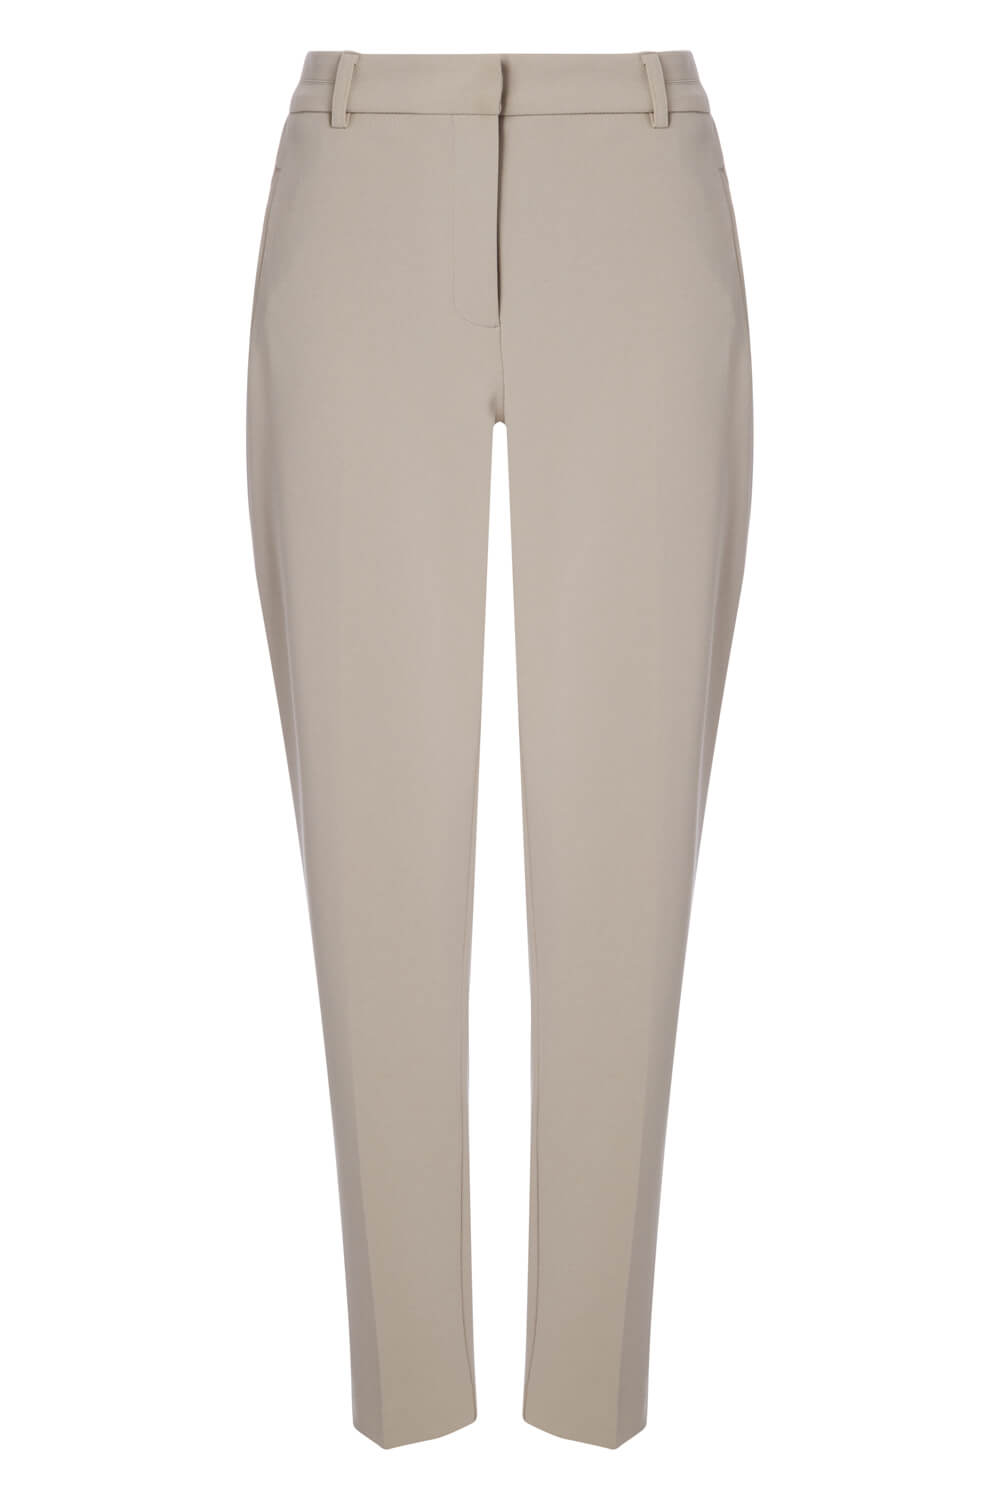 Taupe Tailored Pleated Trouser, Image 5 of 5